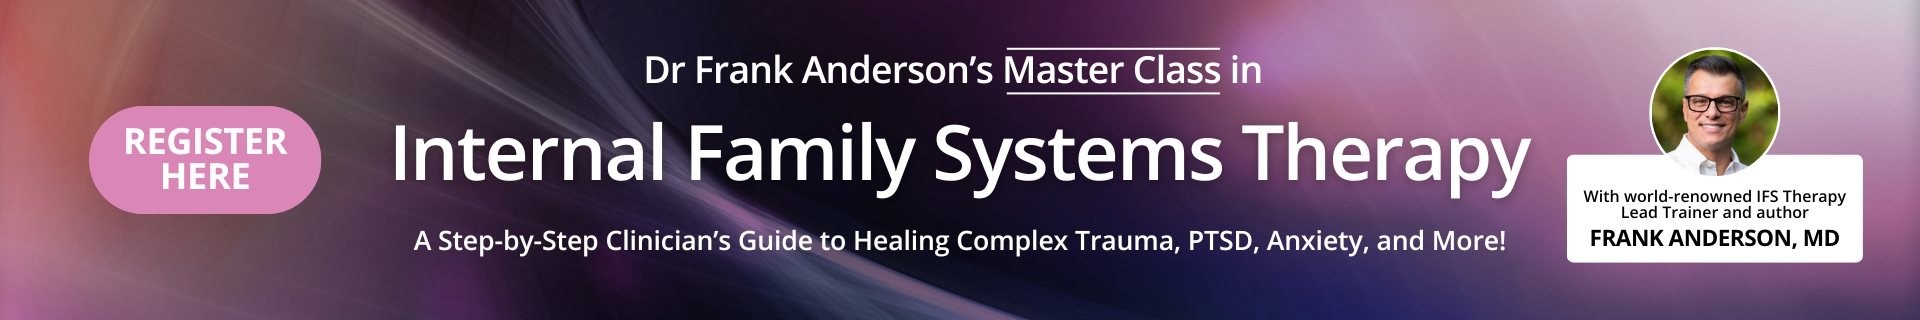 Frank Anderson’s Master Class in Internal Family Systems Therapy